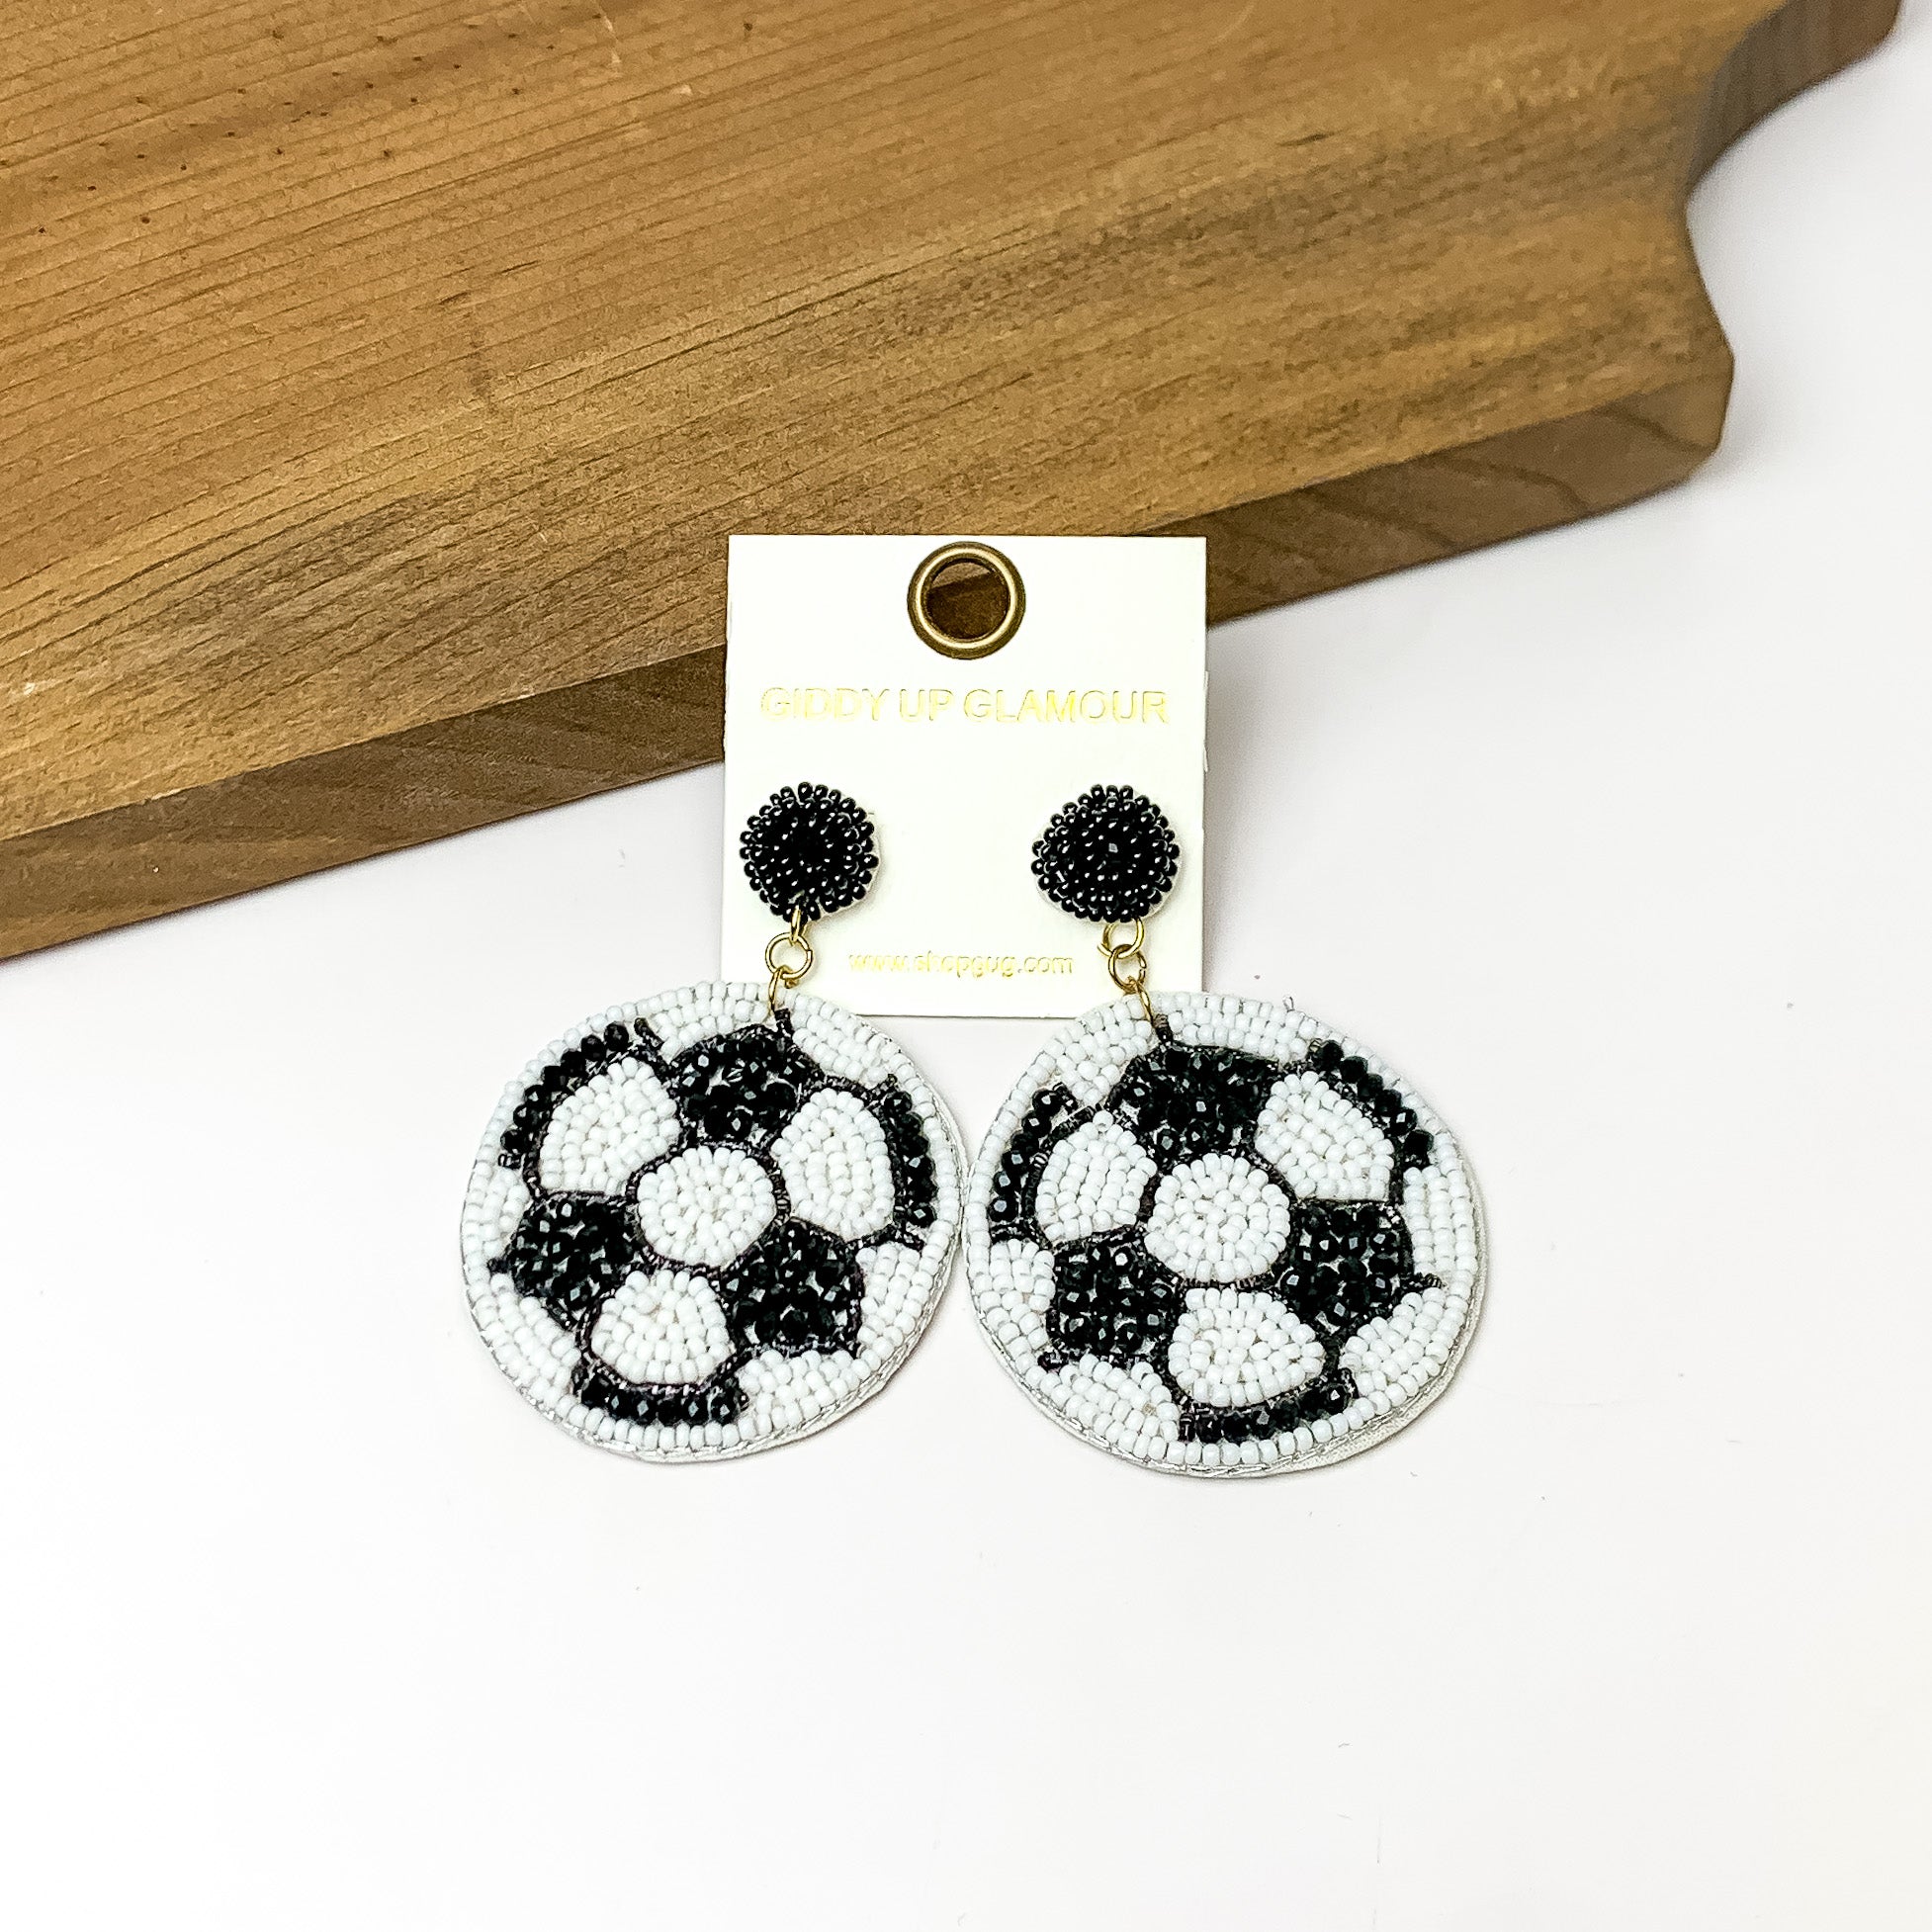 Soccer ball Circular Beaded Earrings in White. Pictured on a white background with the earrings against a wood piece.